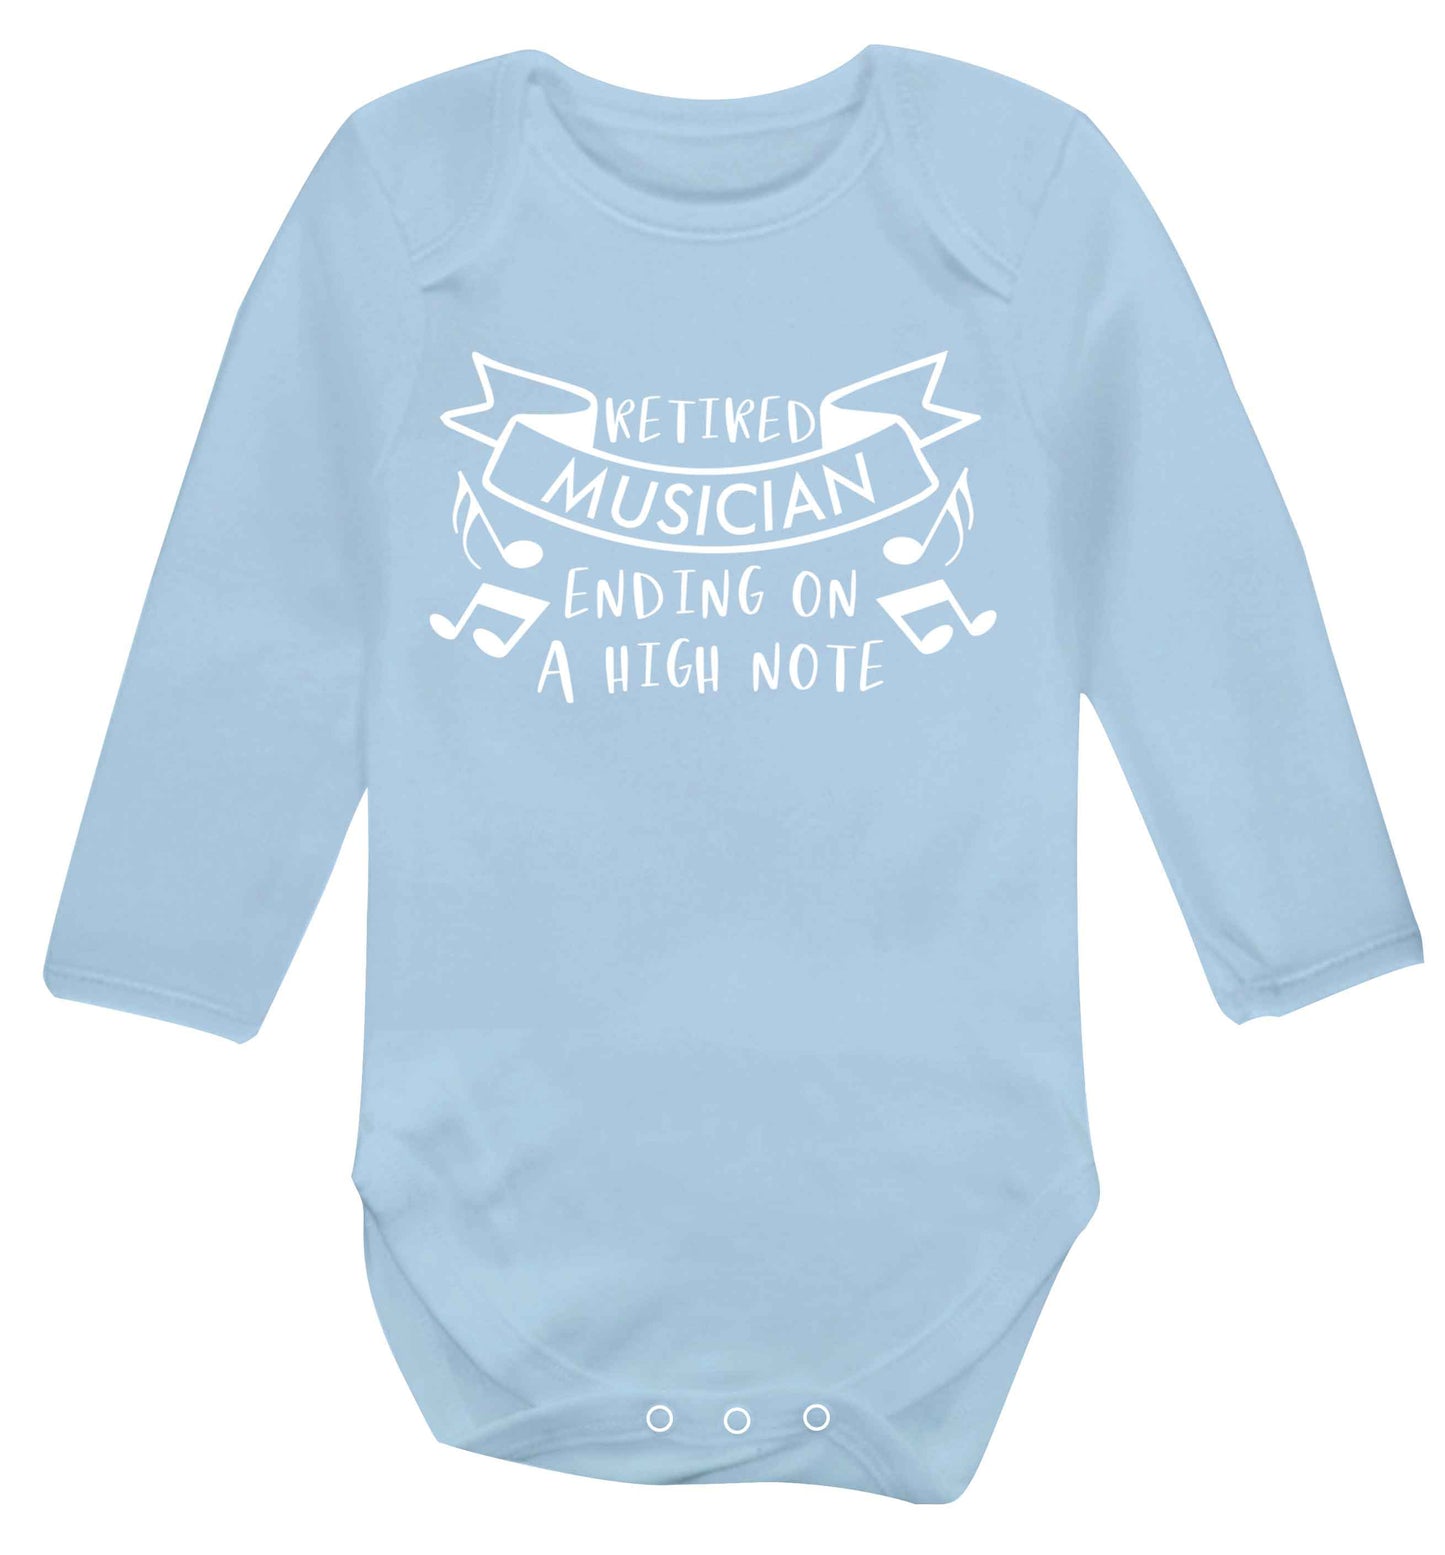 Retired musician ending on a high note Baby Vest long sleeved pale blue 6-12 months